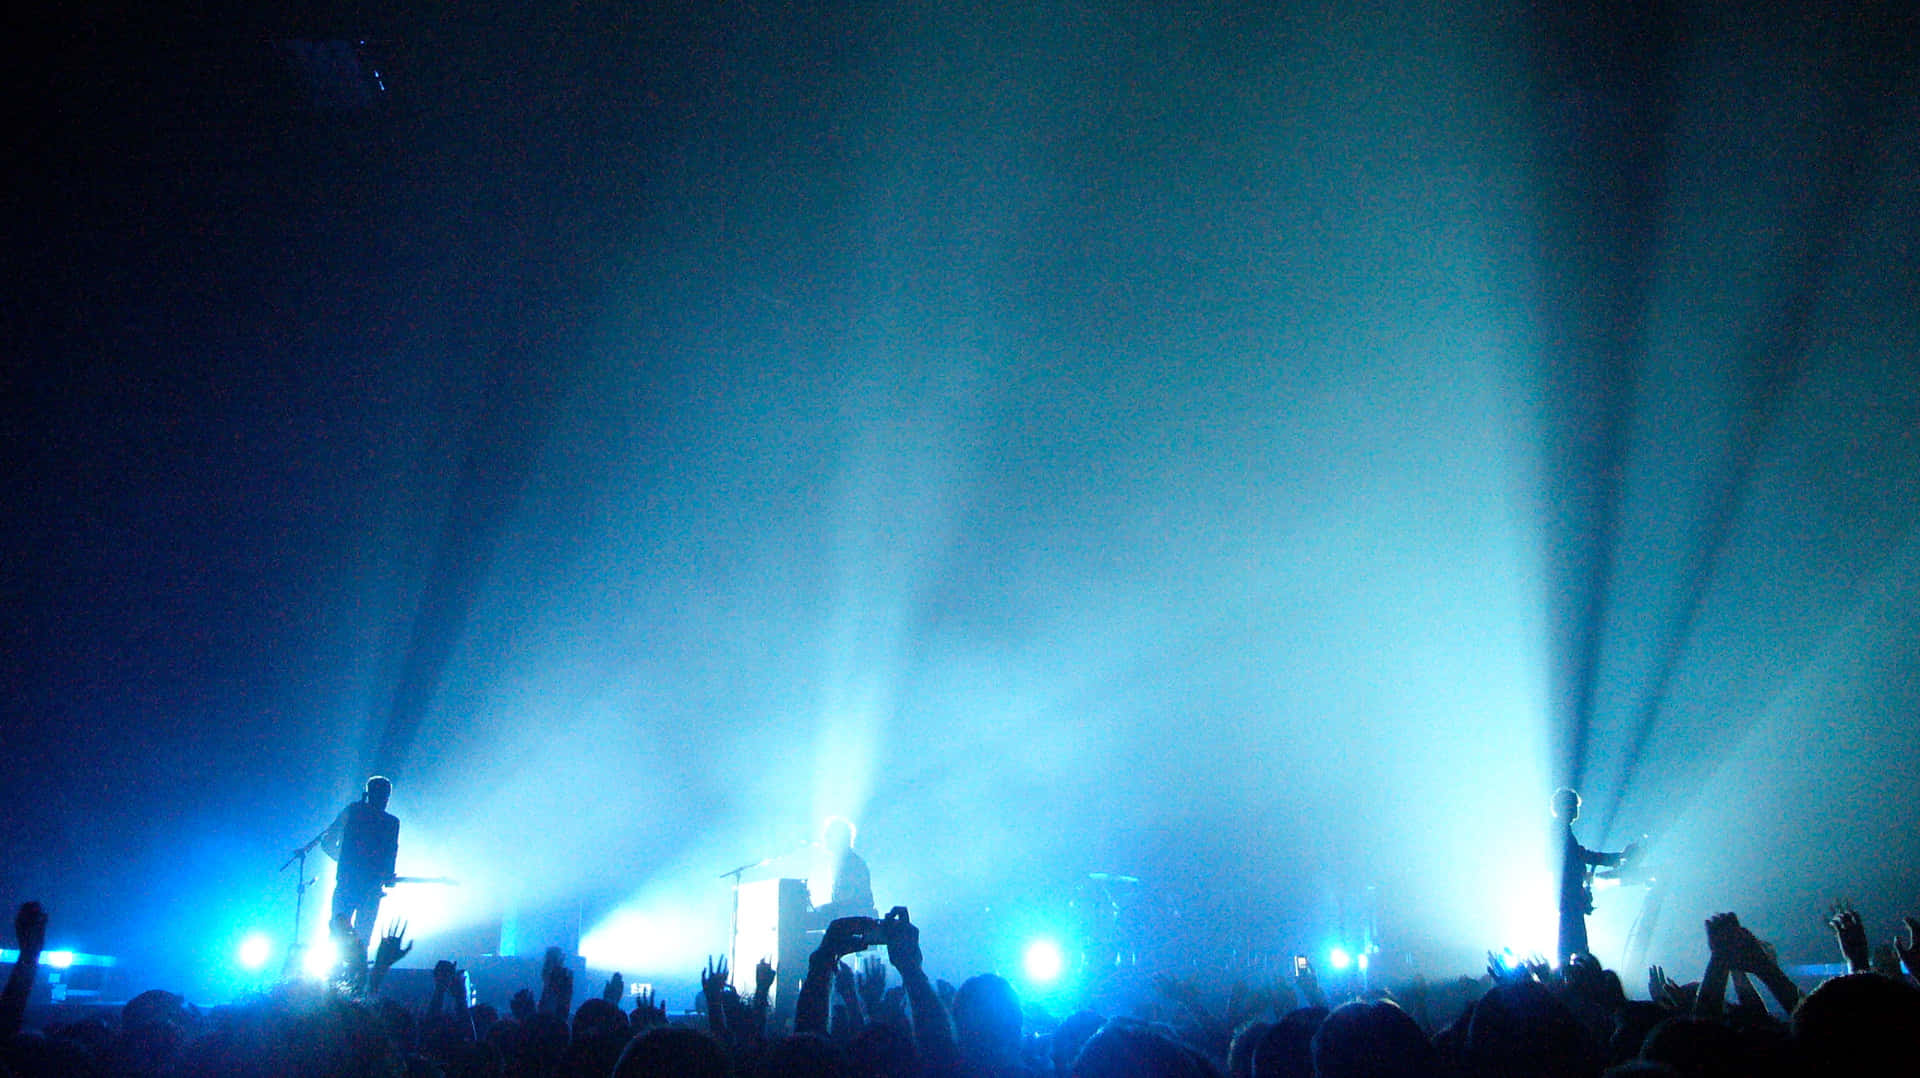 Band Performing With Blue Lights Concert Background